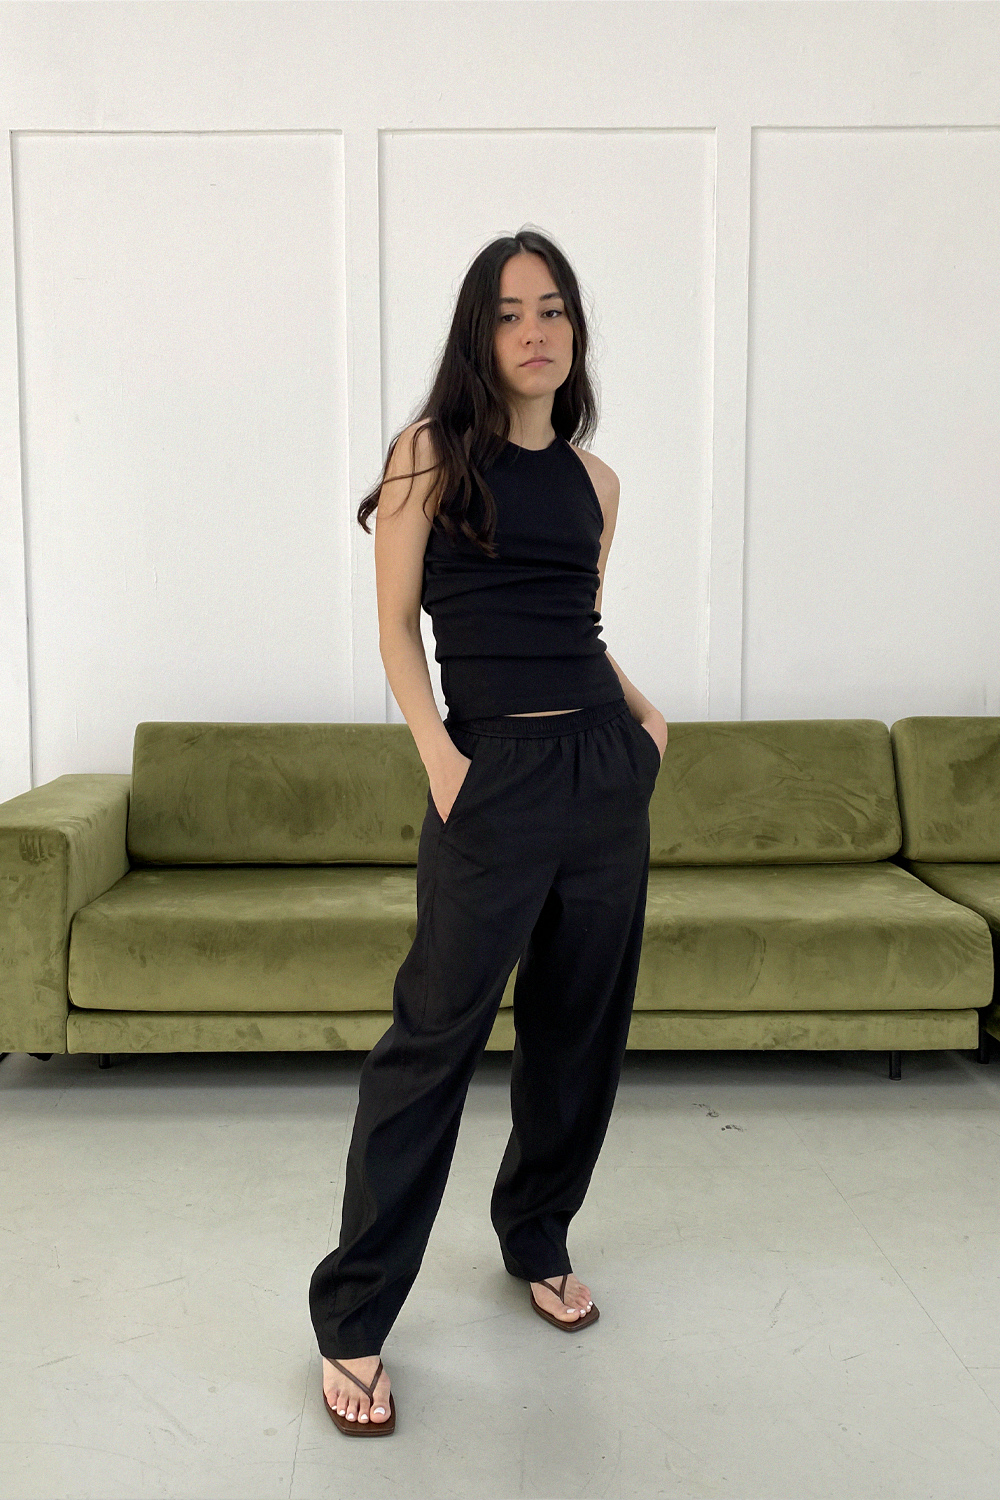 Two linen trousers, two looks » teetharejade